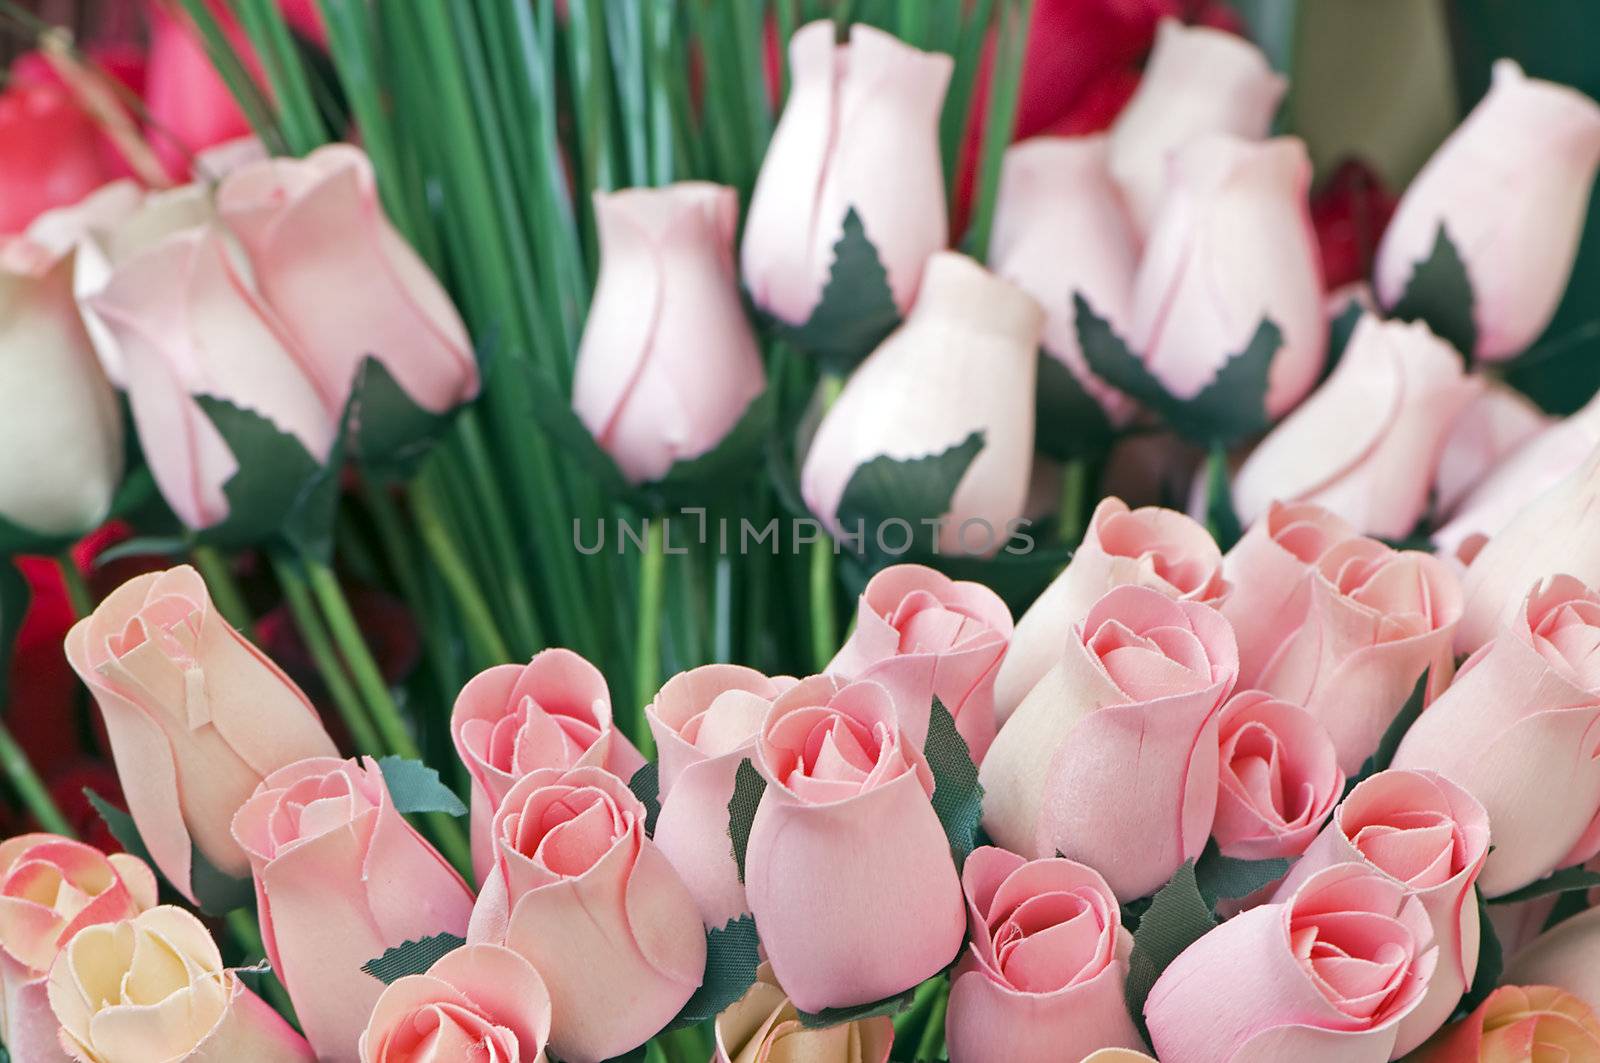 Wooden tulips by lebanmax